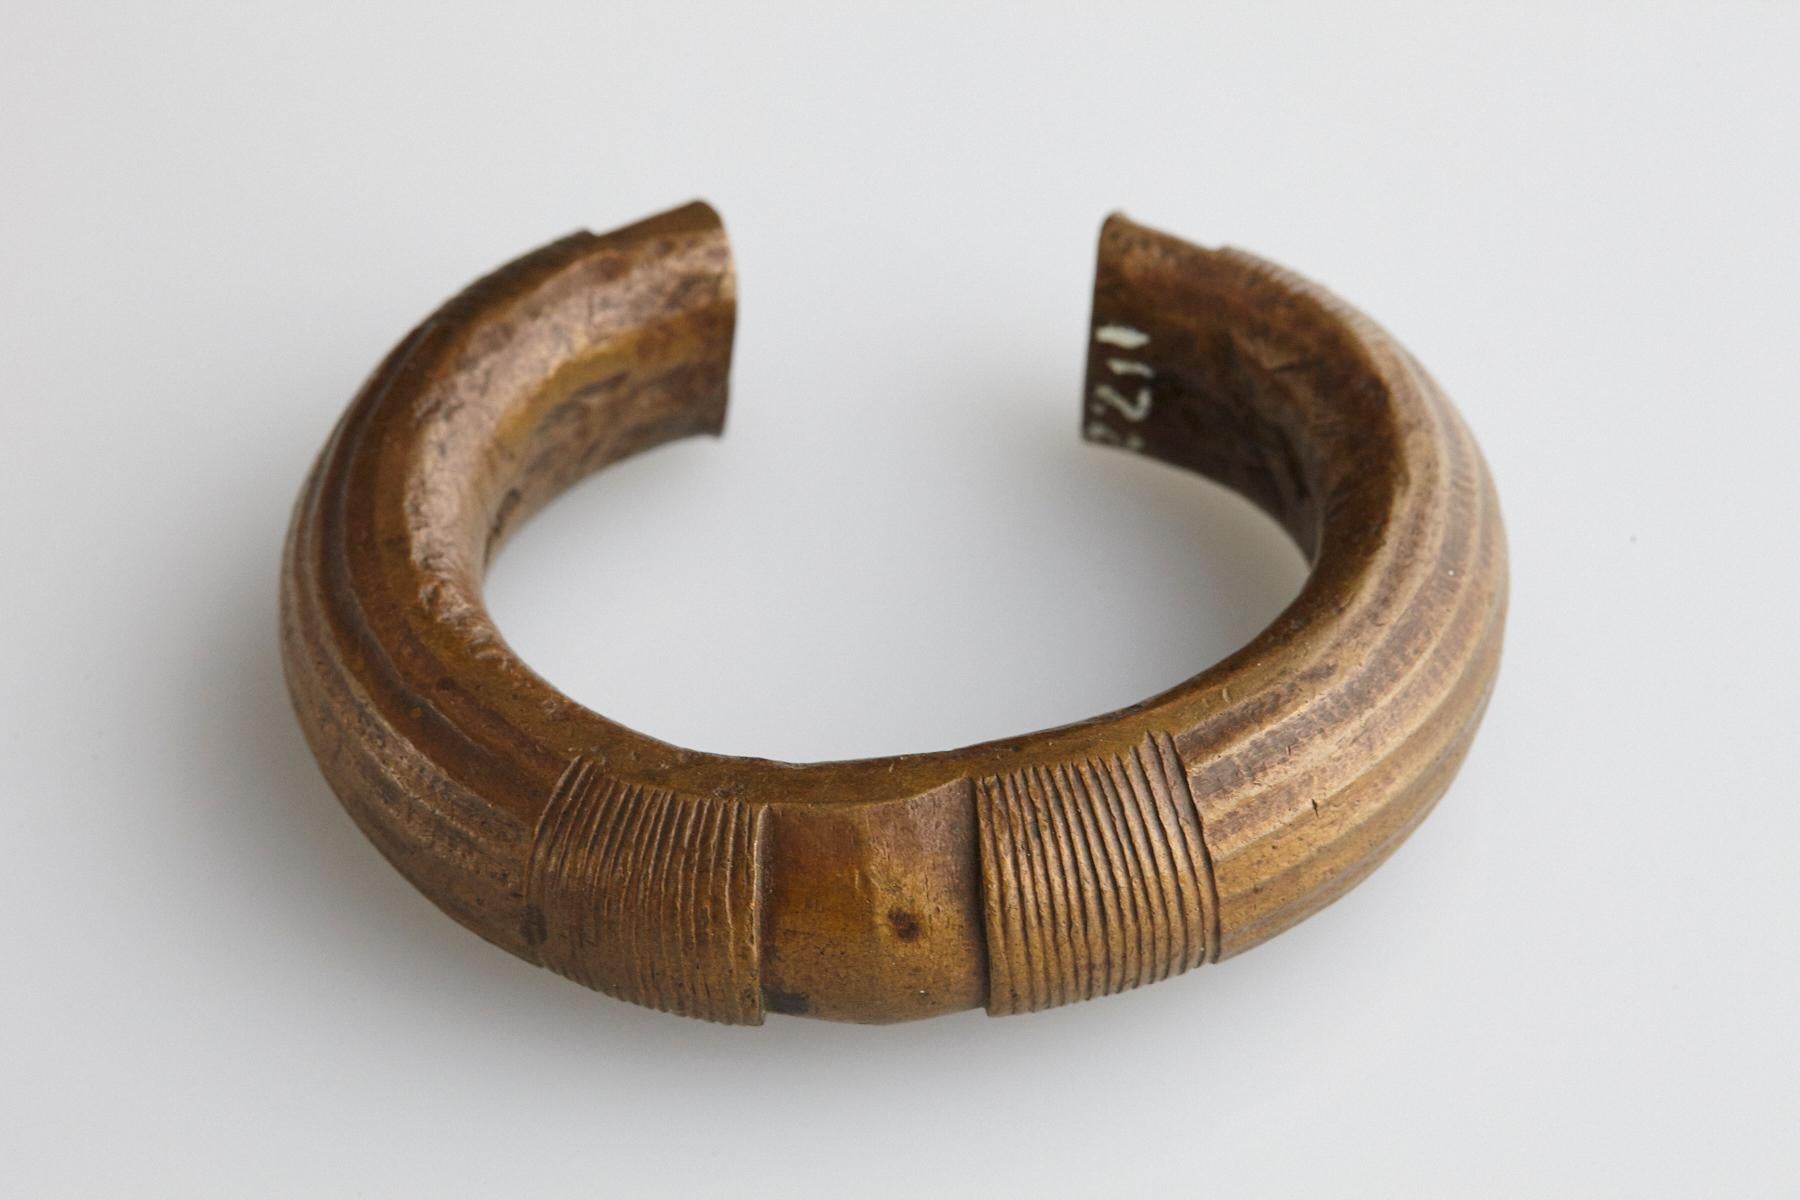 19th-century bronze currency bracelet / Manilla in horseshoe form with fixed opening. Intricate graphical design with lines and accent points on the top and at both tips. This type of bracelet was worn or used by the Baoule and Dogon People, who are